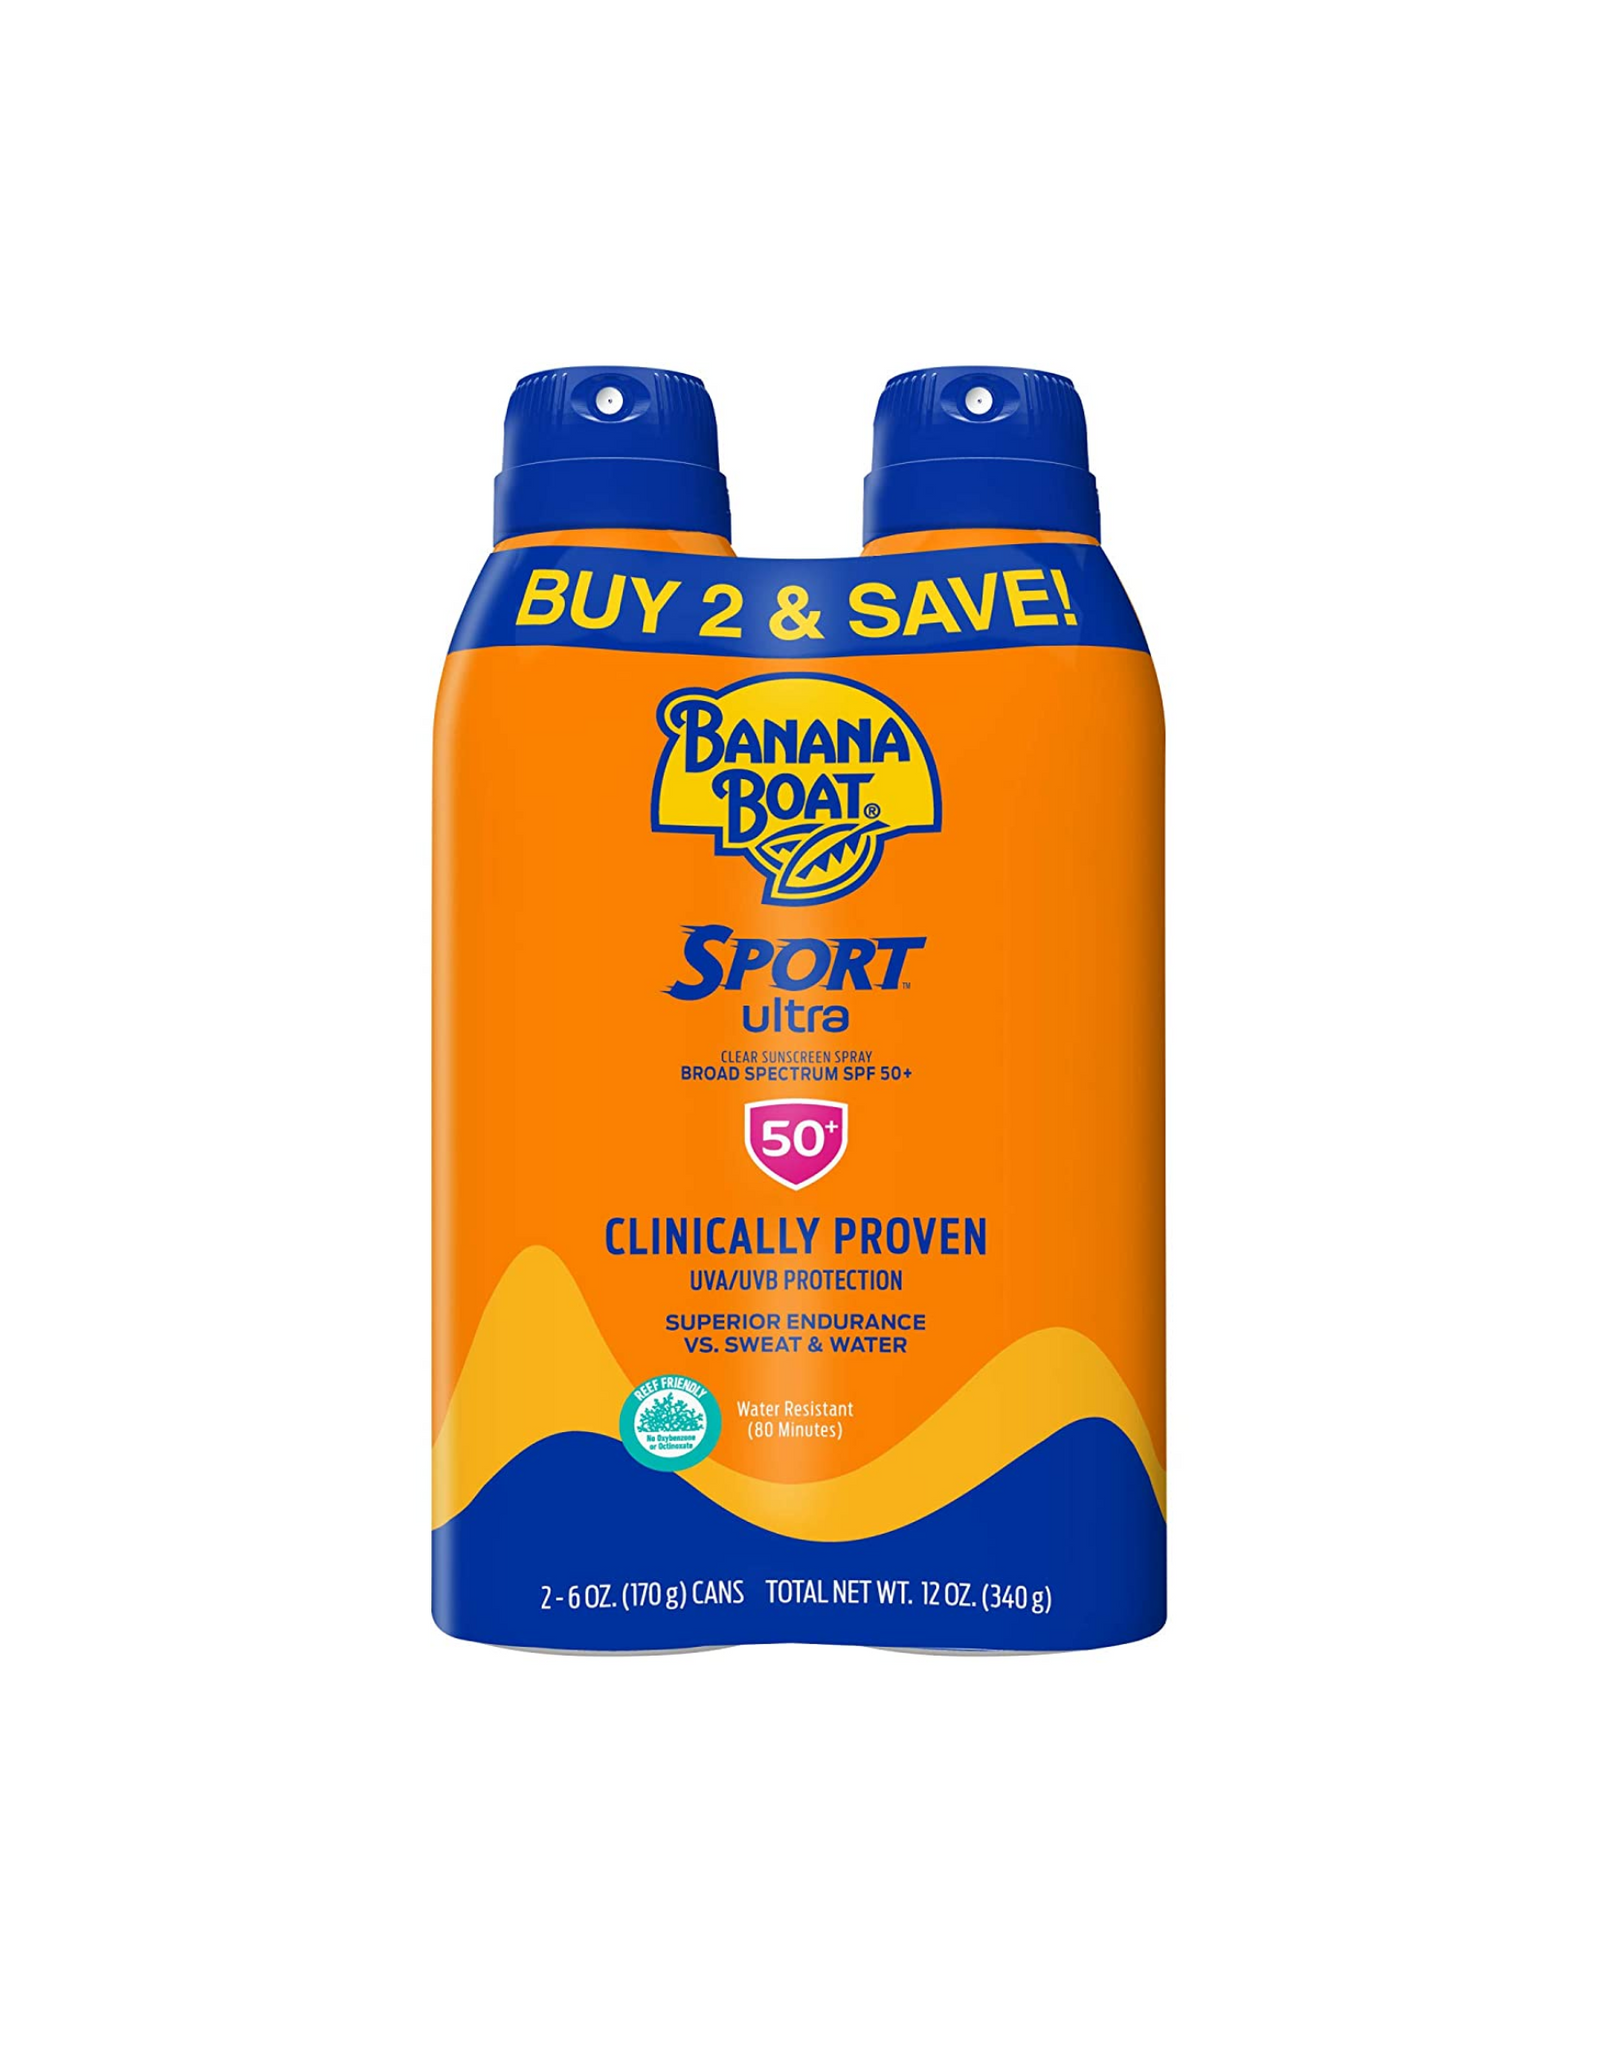 Banana Boat Sport Ultra Sunscreen Spray with UVA/UVB Protection, Broad Spectrum, SPF 50, 6oz. - Twin Pack